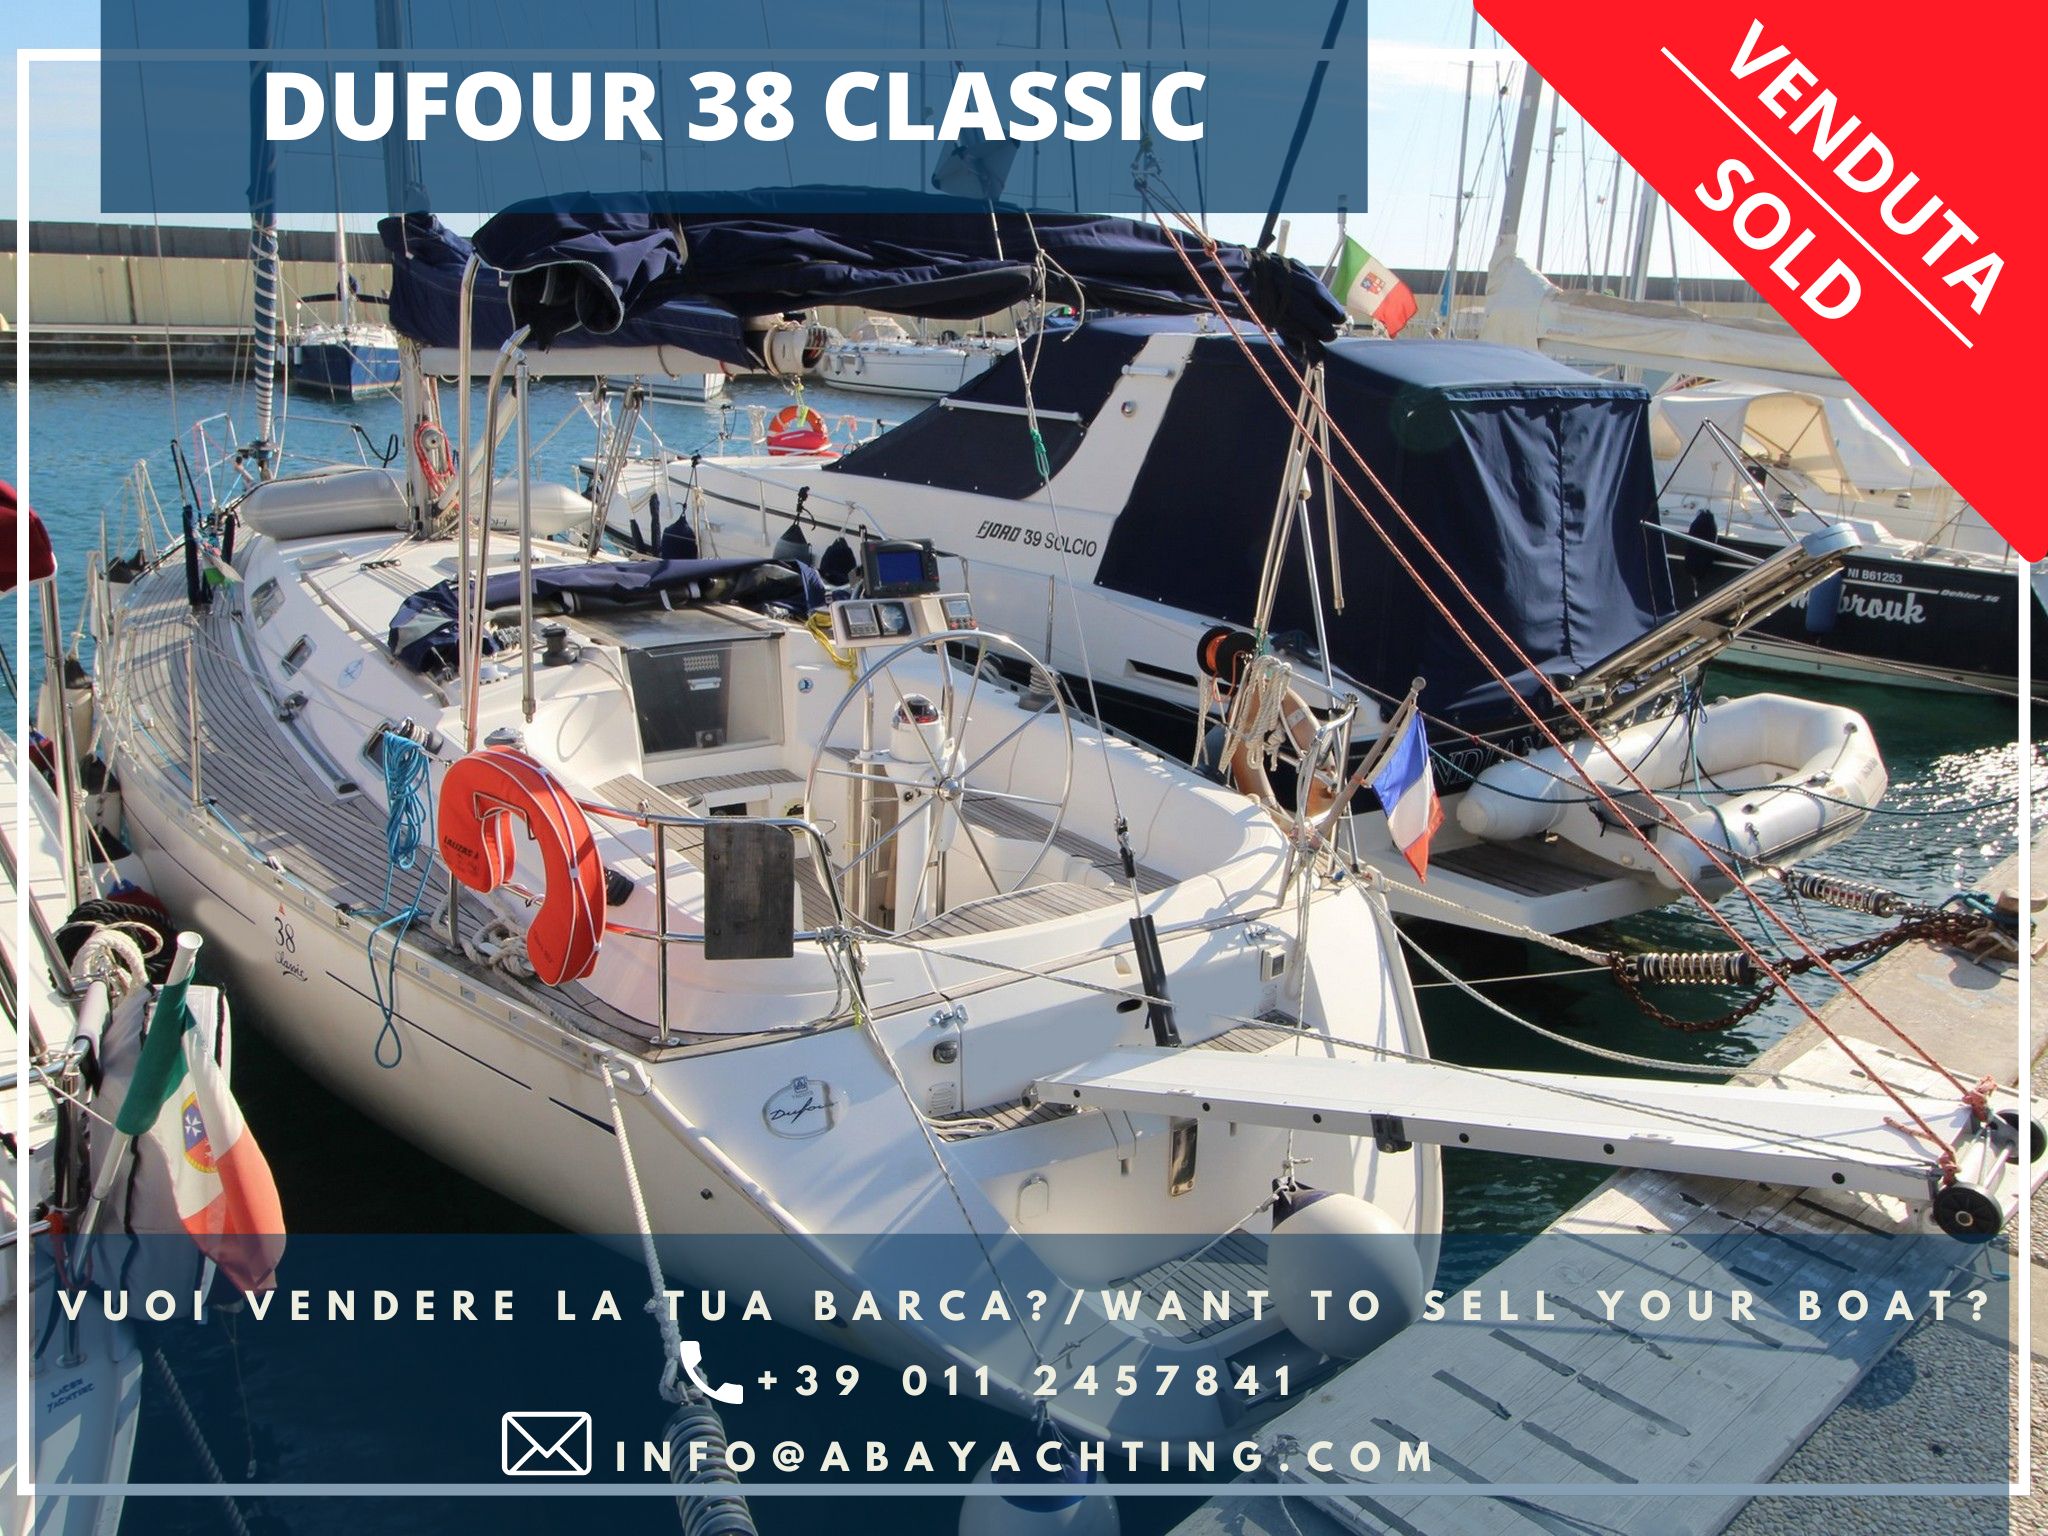 Dufour 38 Classic sold